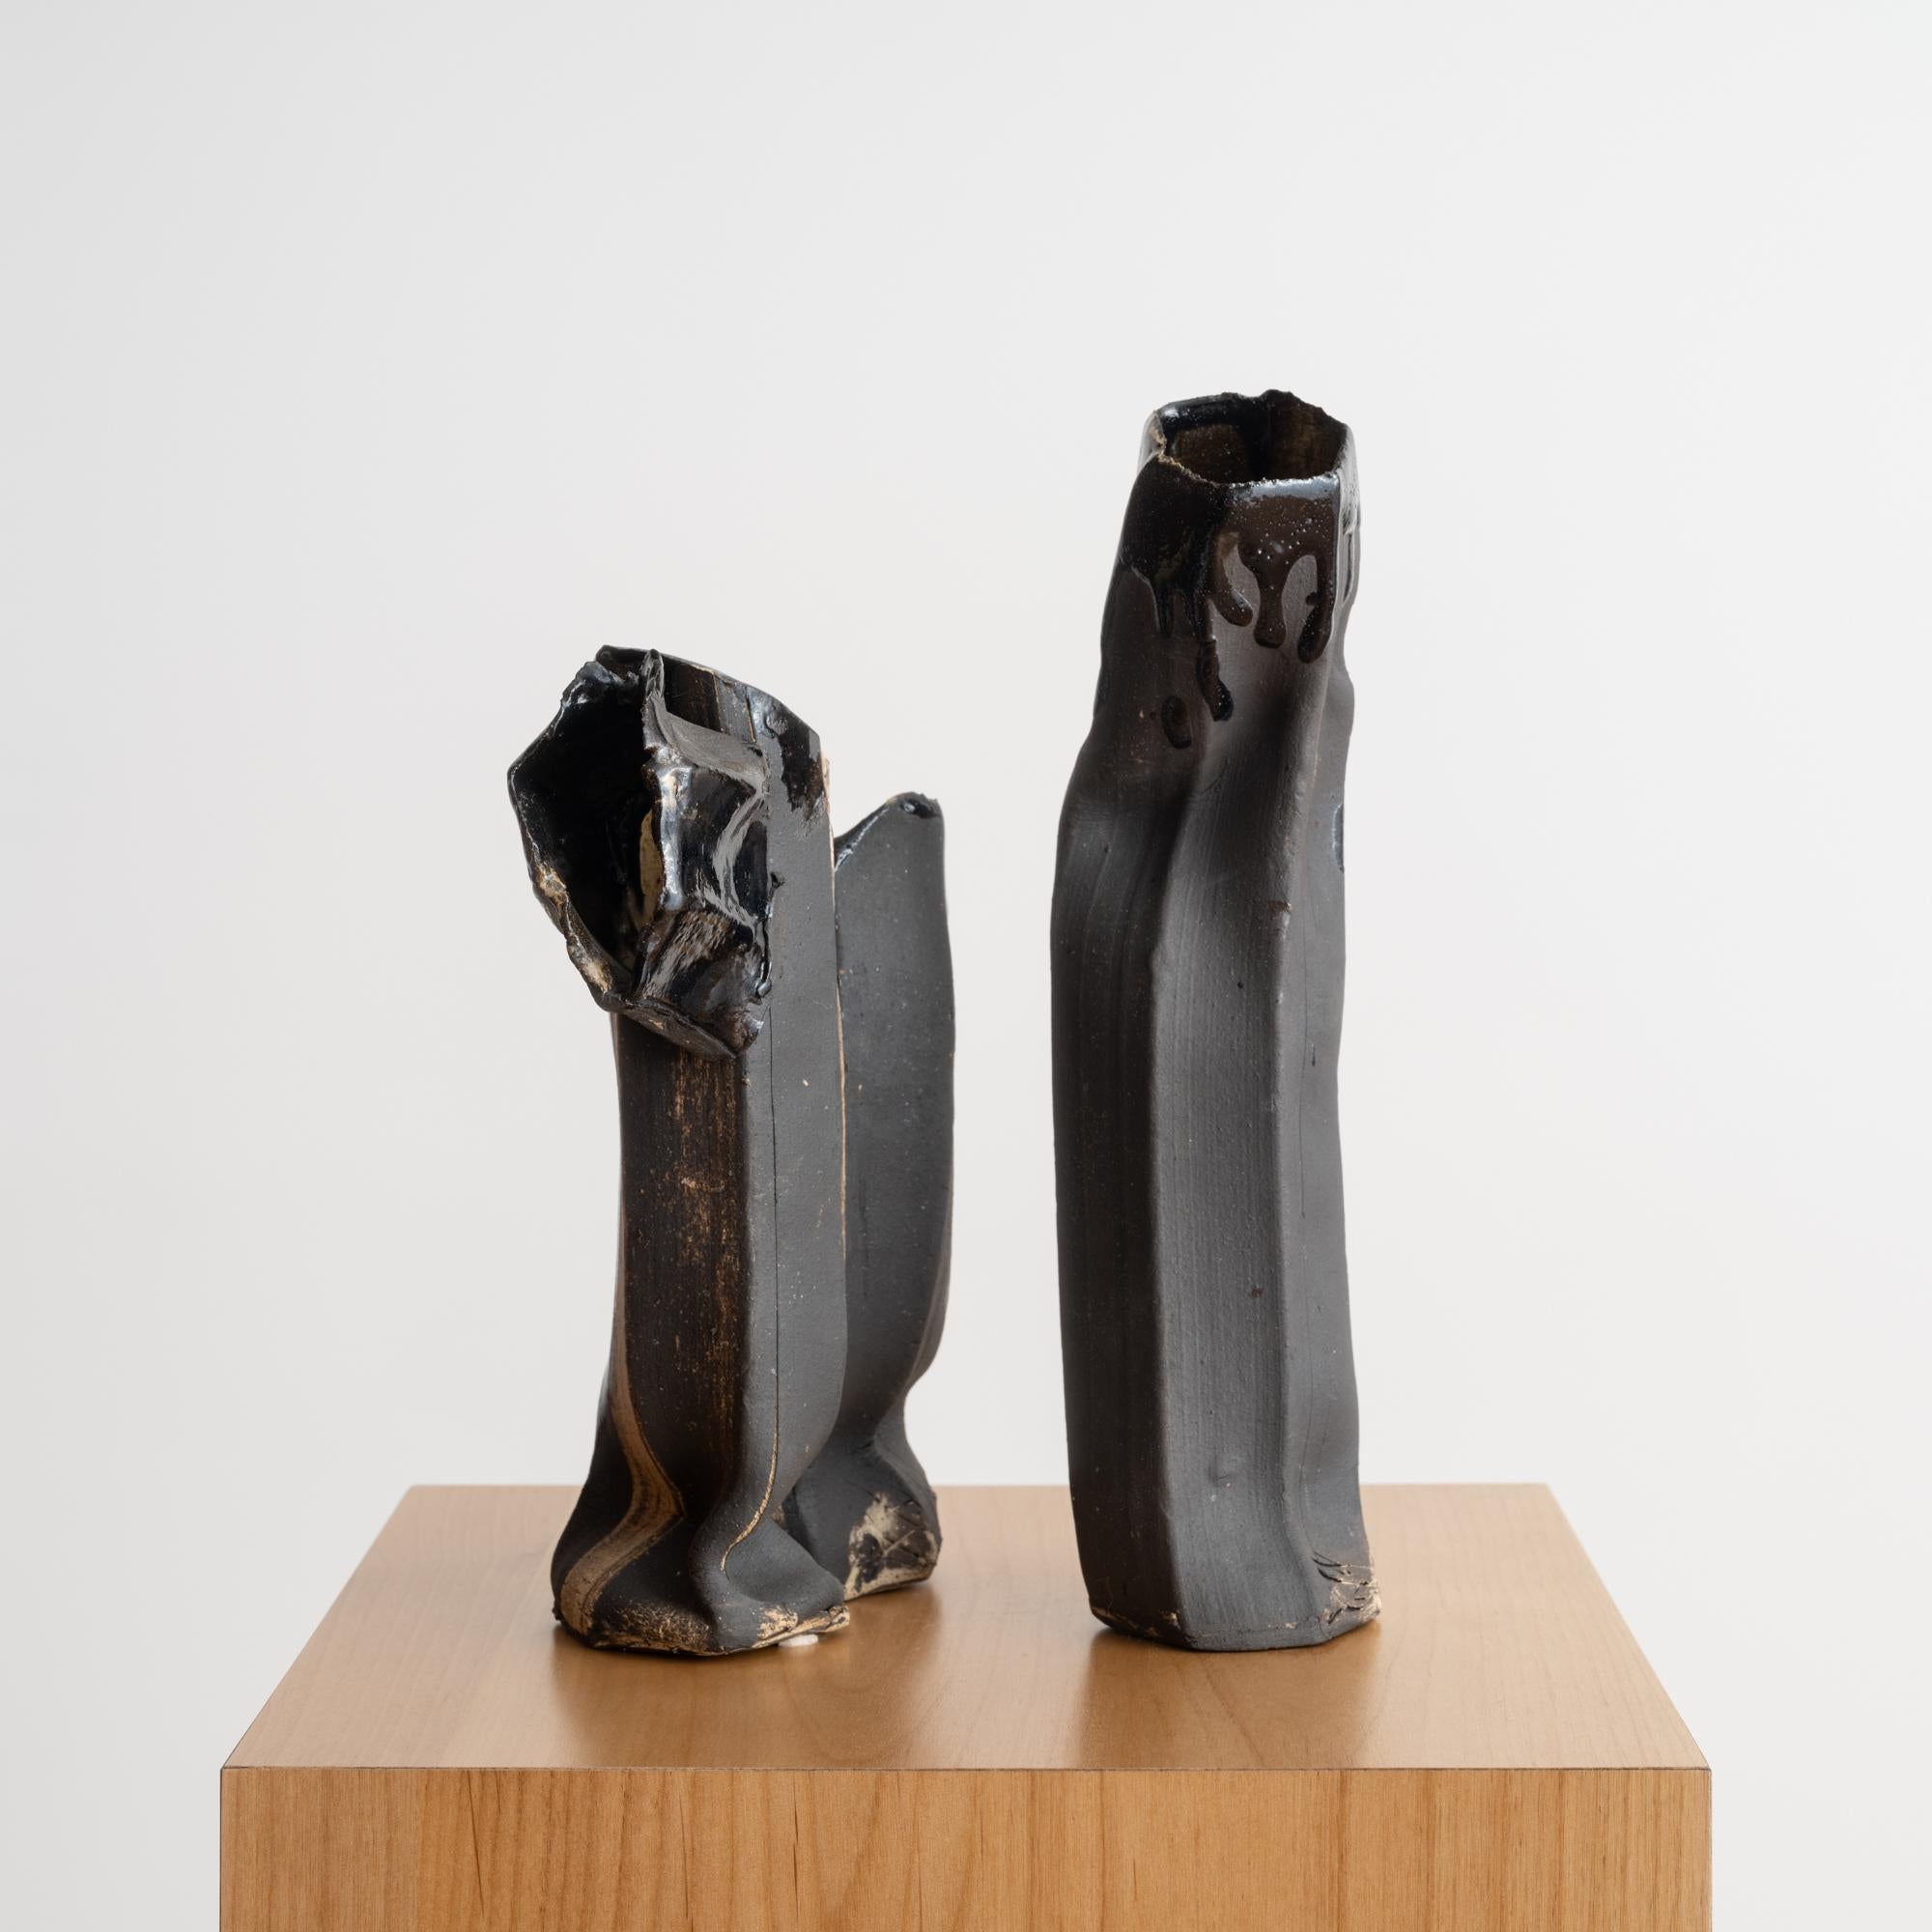 This unique sculptural vase is comprised of two hand-built ceramic components that fit together to create one visually arresting work of art that sustains the viewer's interest. Diminutive in scale, and dynamic from all angles, the piece is sculpted